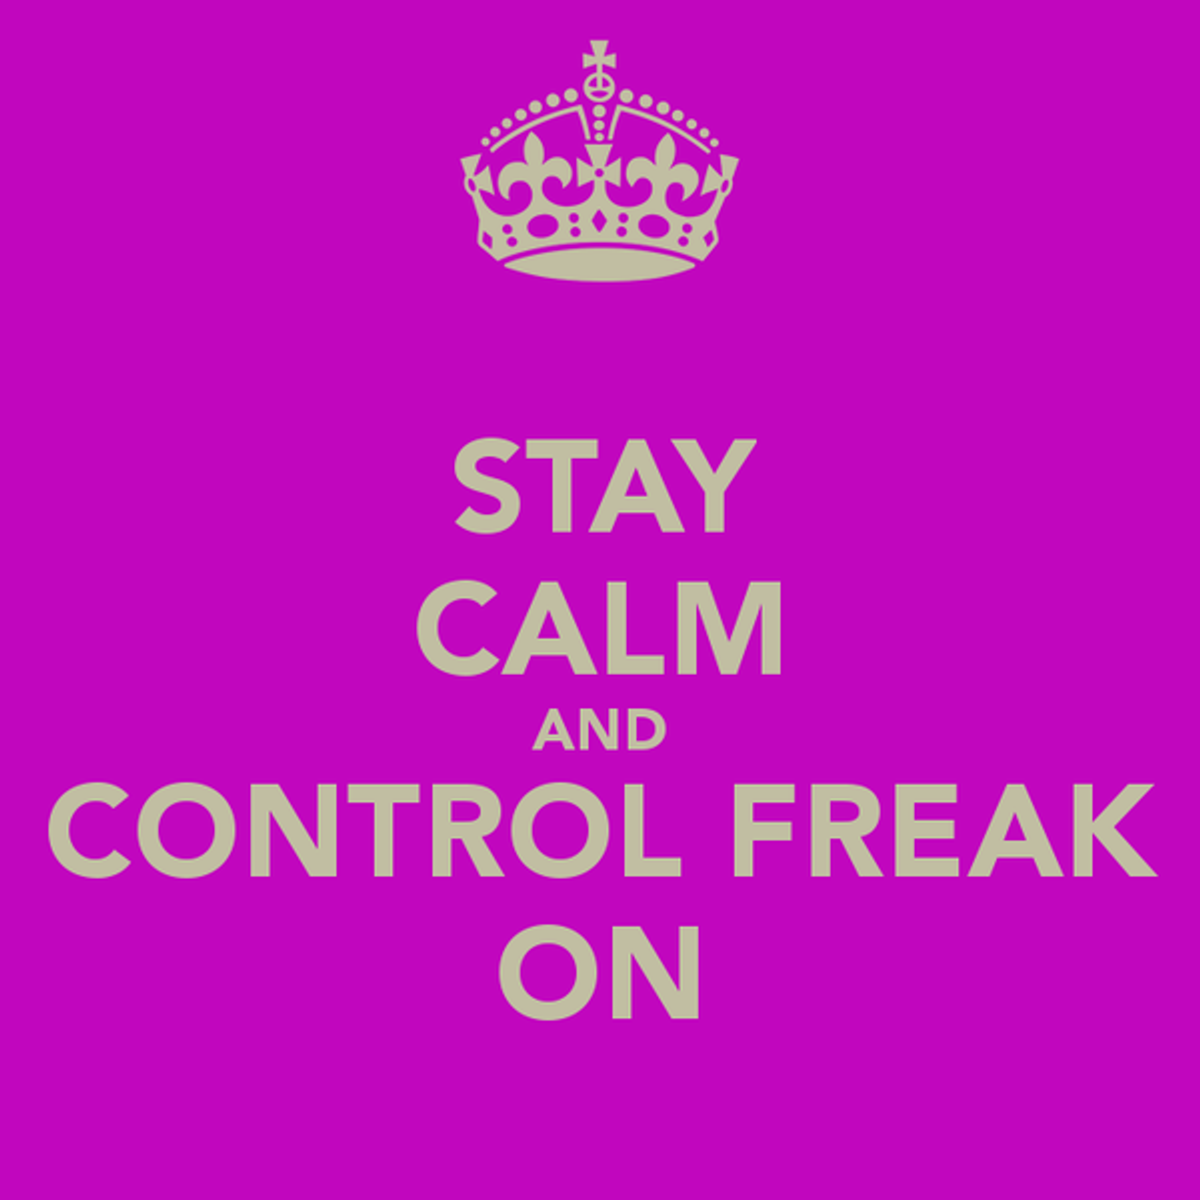 Being a Control Freak When You Have No Control